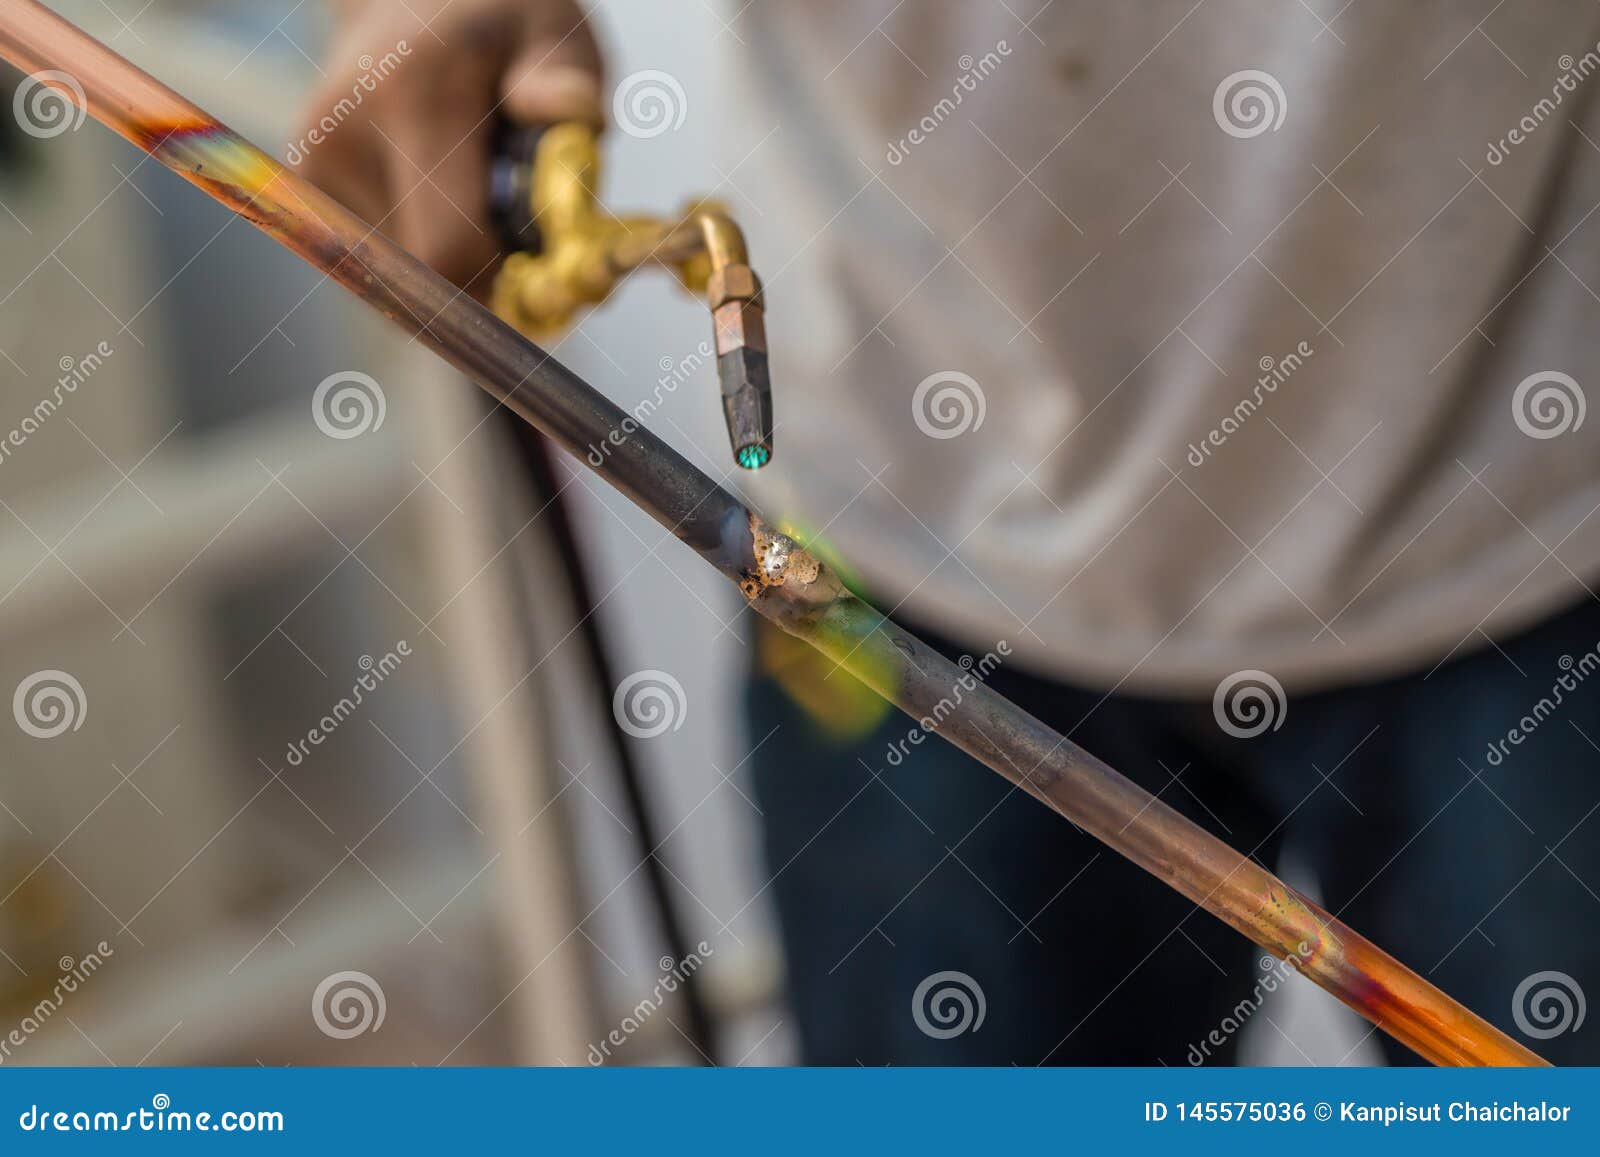 Welding Of Copper Pipe Of A Methane Gas Pipeline Or Of A Conditioning Or Water System Welding Soldering Copper Pipes Stock Photo Image Of Contractor Conditioning 145575036